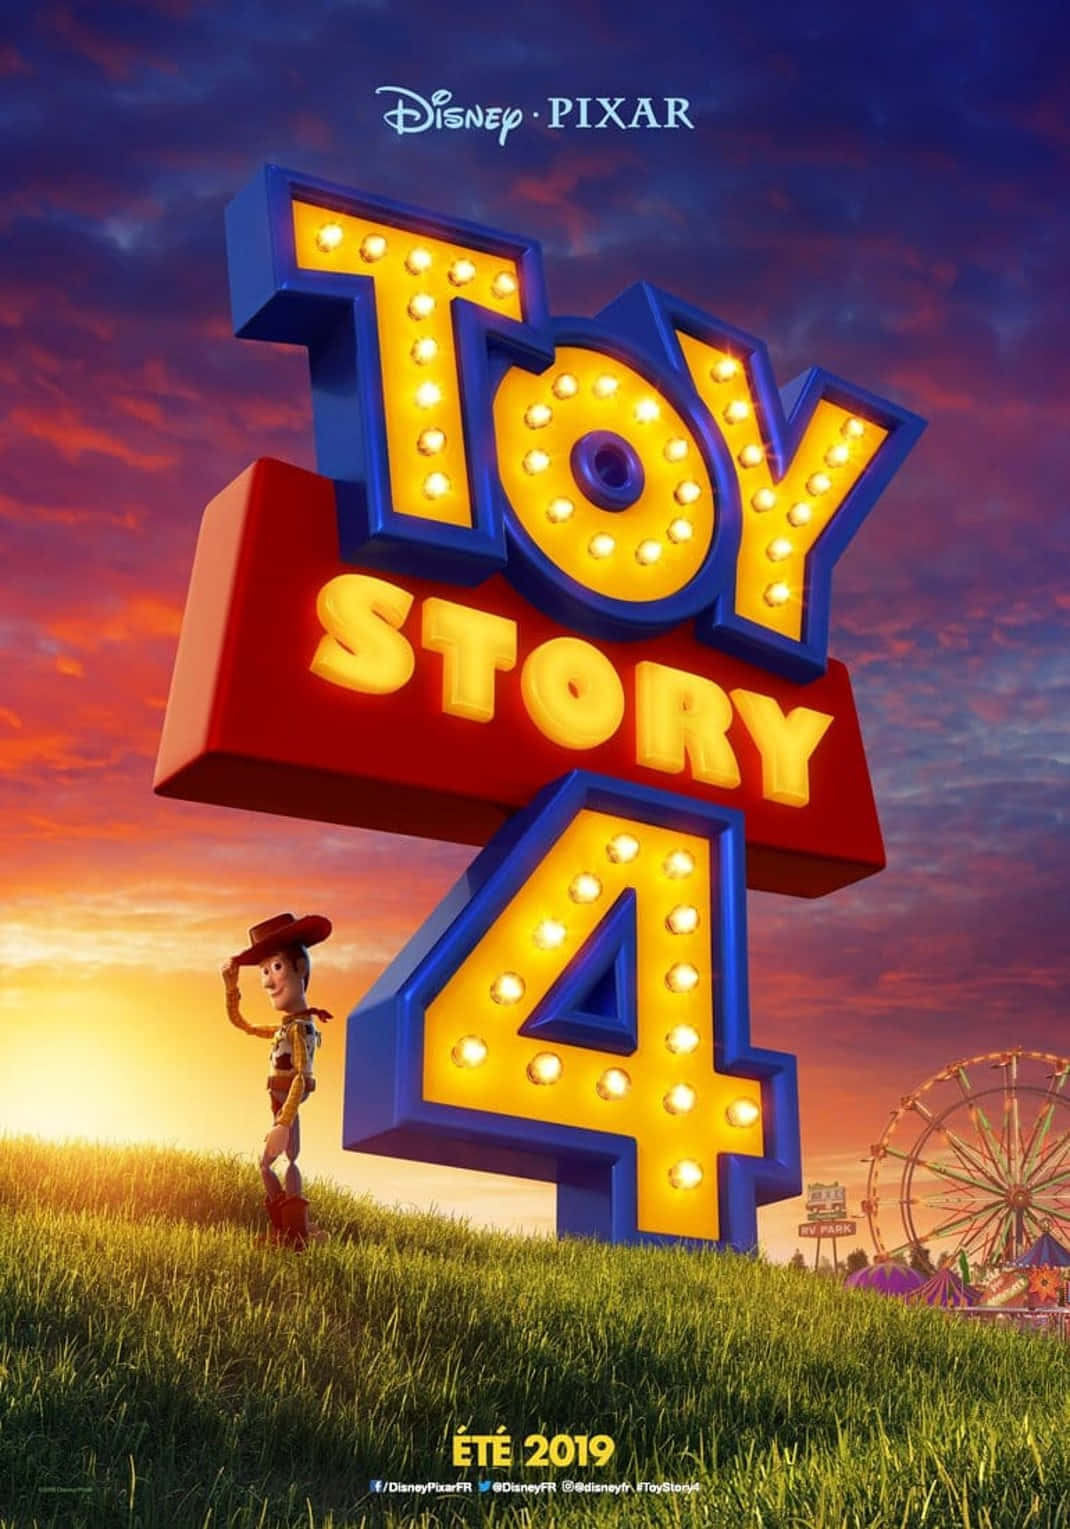 Woody, Buzz, and Forky will go on a fun-filled journey in the new movie Toy Story 4